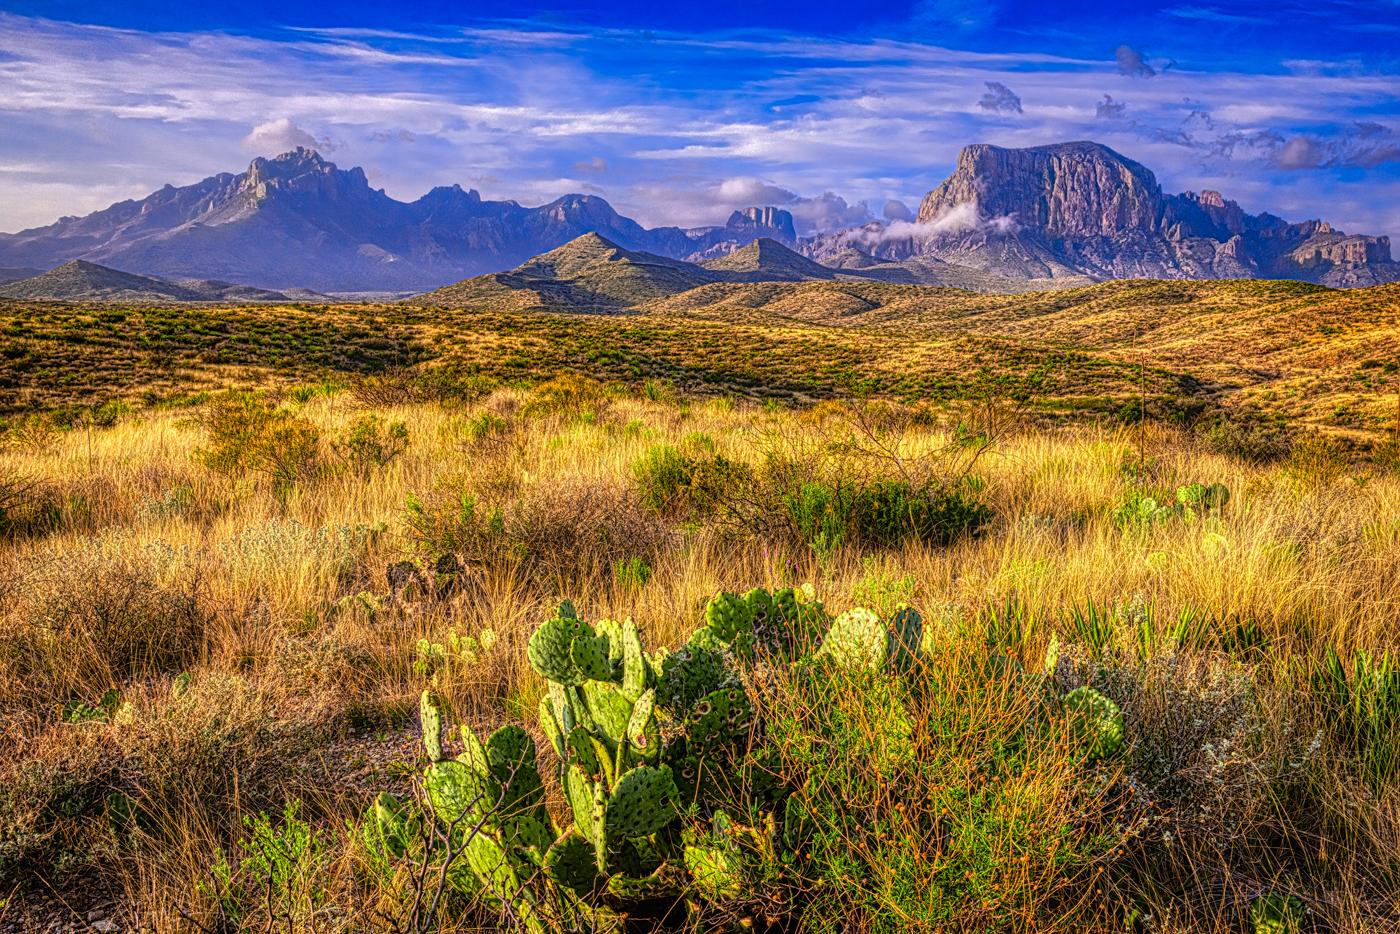 Alan Montgomery Landscape Photograph - Big Bend 1 - Texas nature landscape with blue sky, mountains, tall grass & cacti